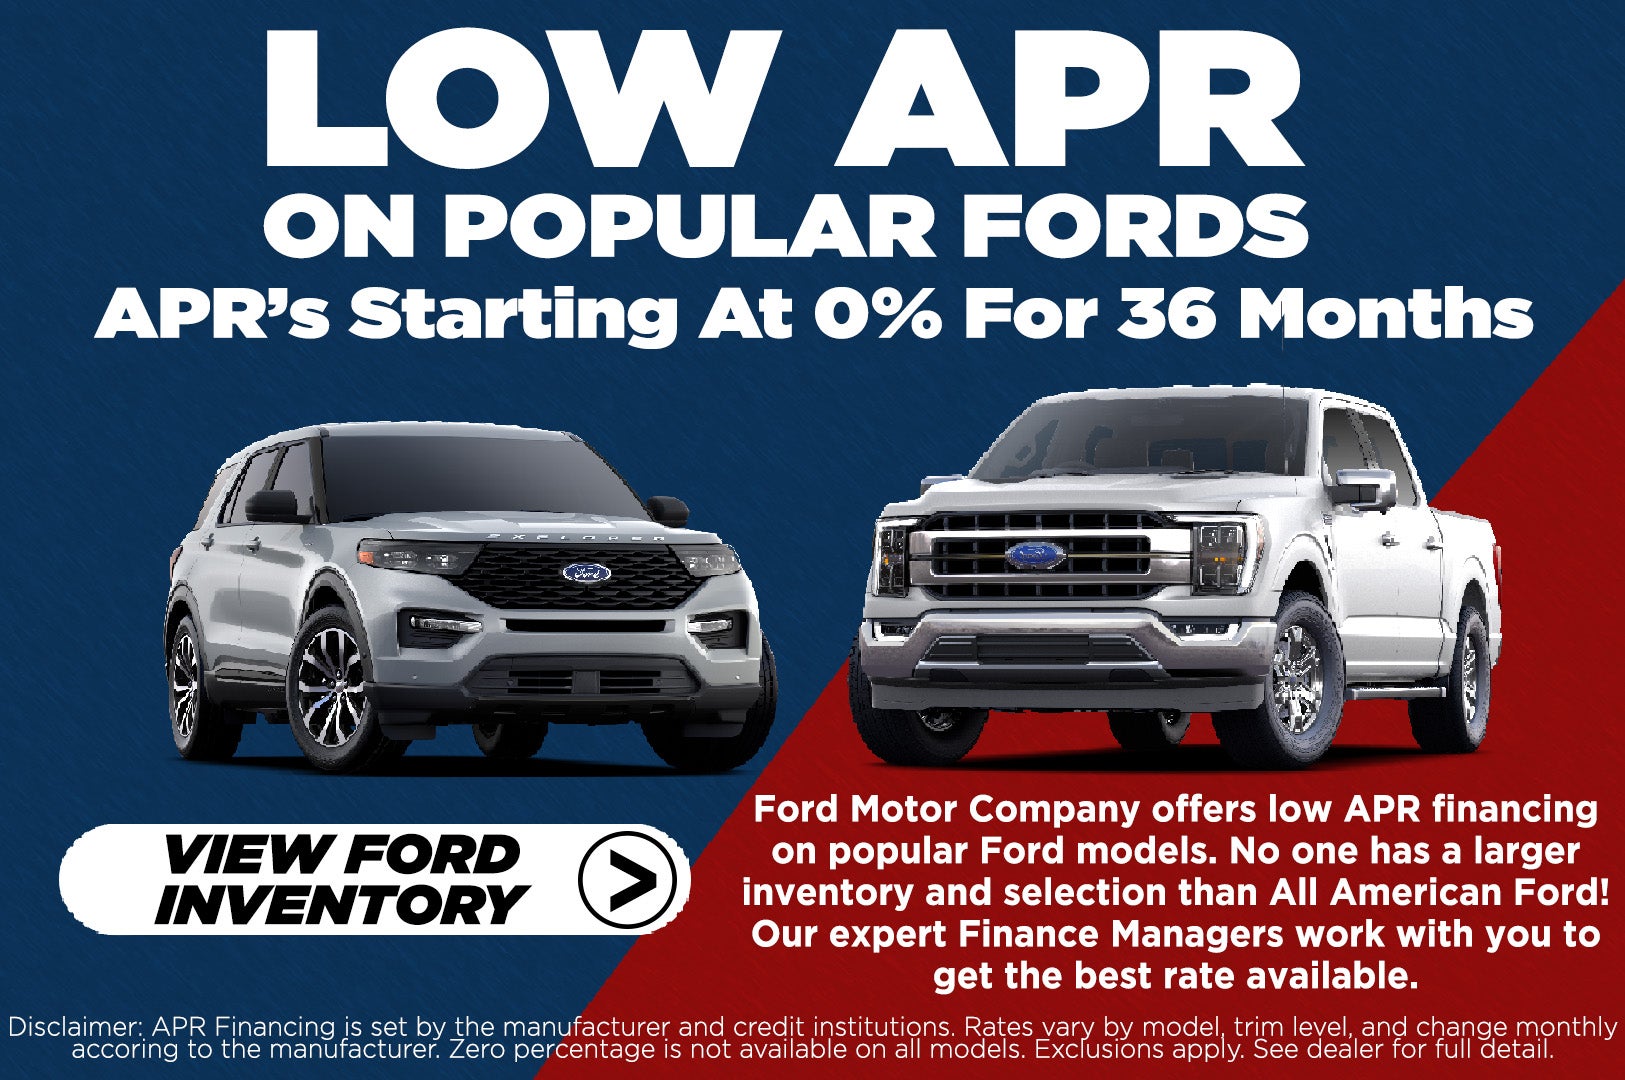 Low APR on Popular Fords